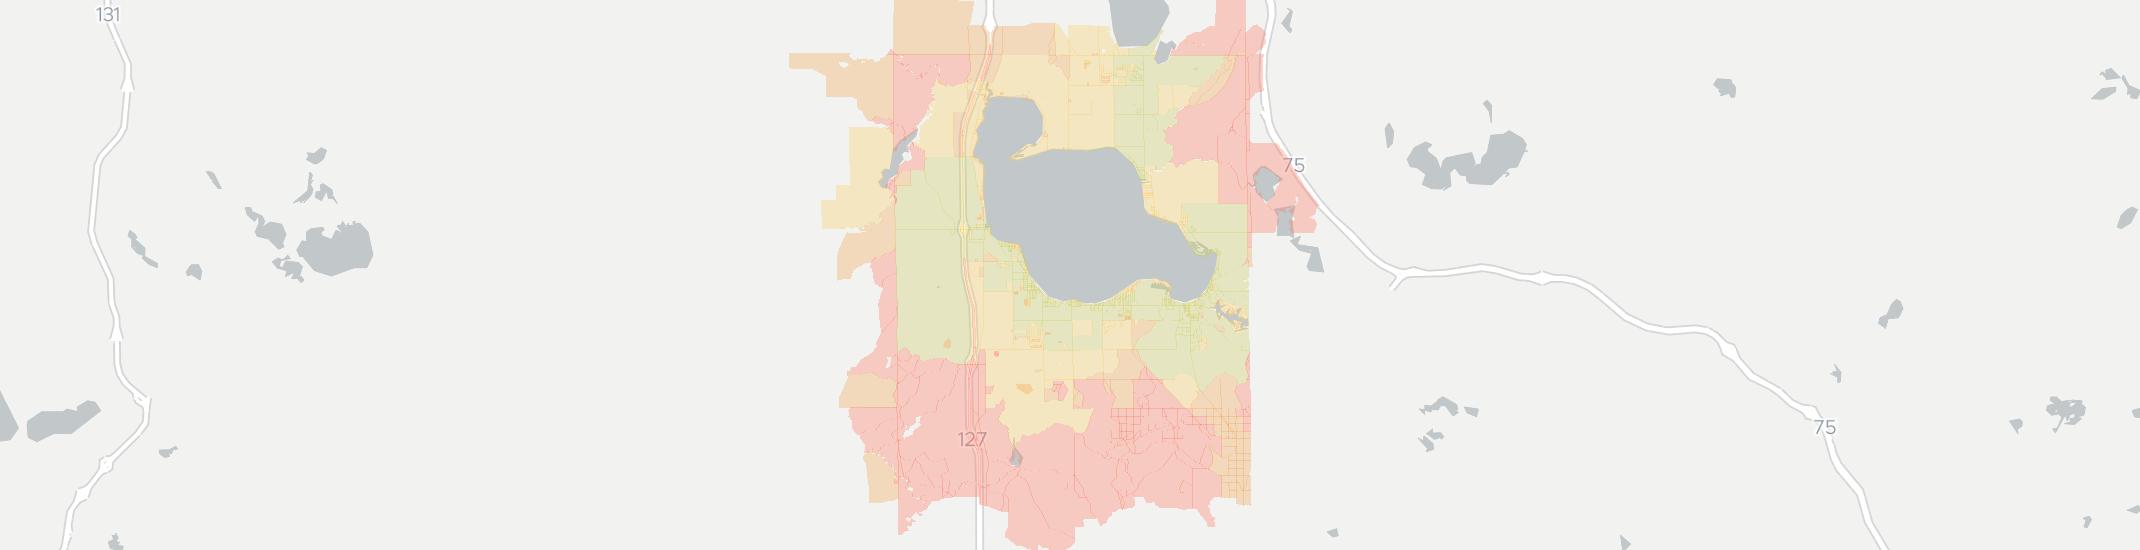 Houghton Lake Internet Competition Map. Click for interactive map.